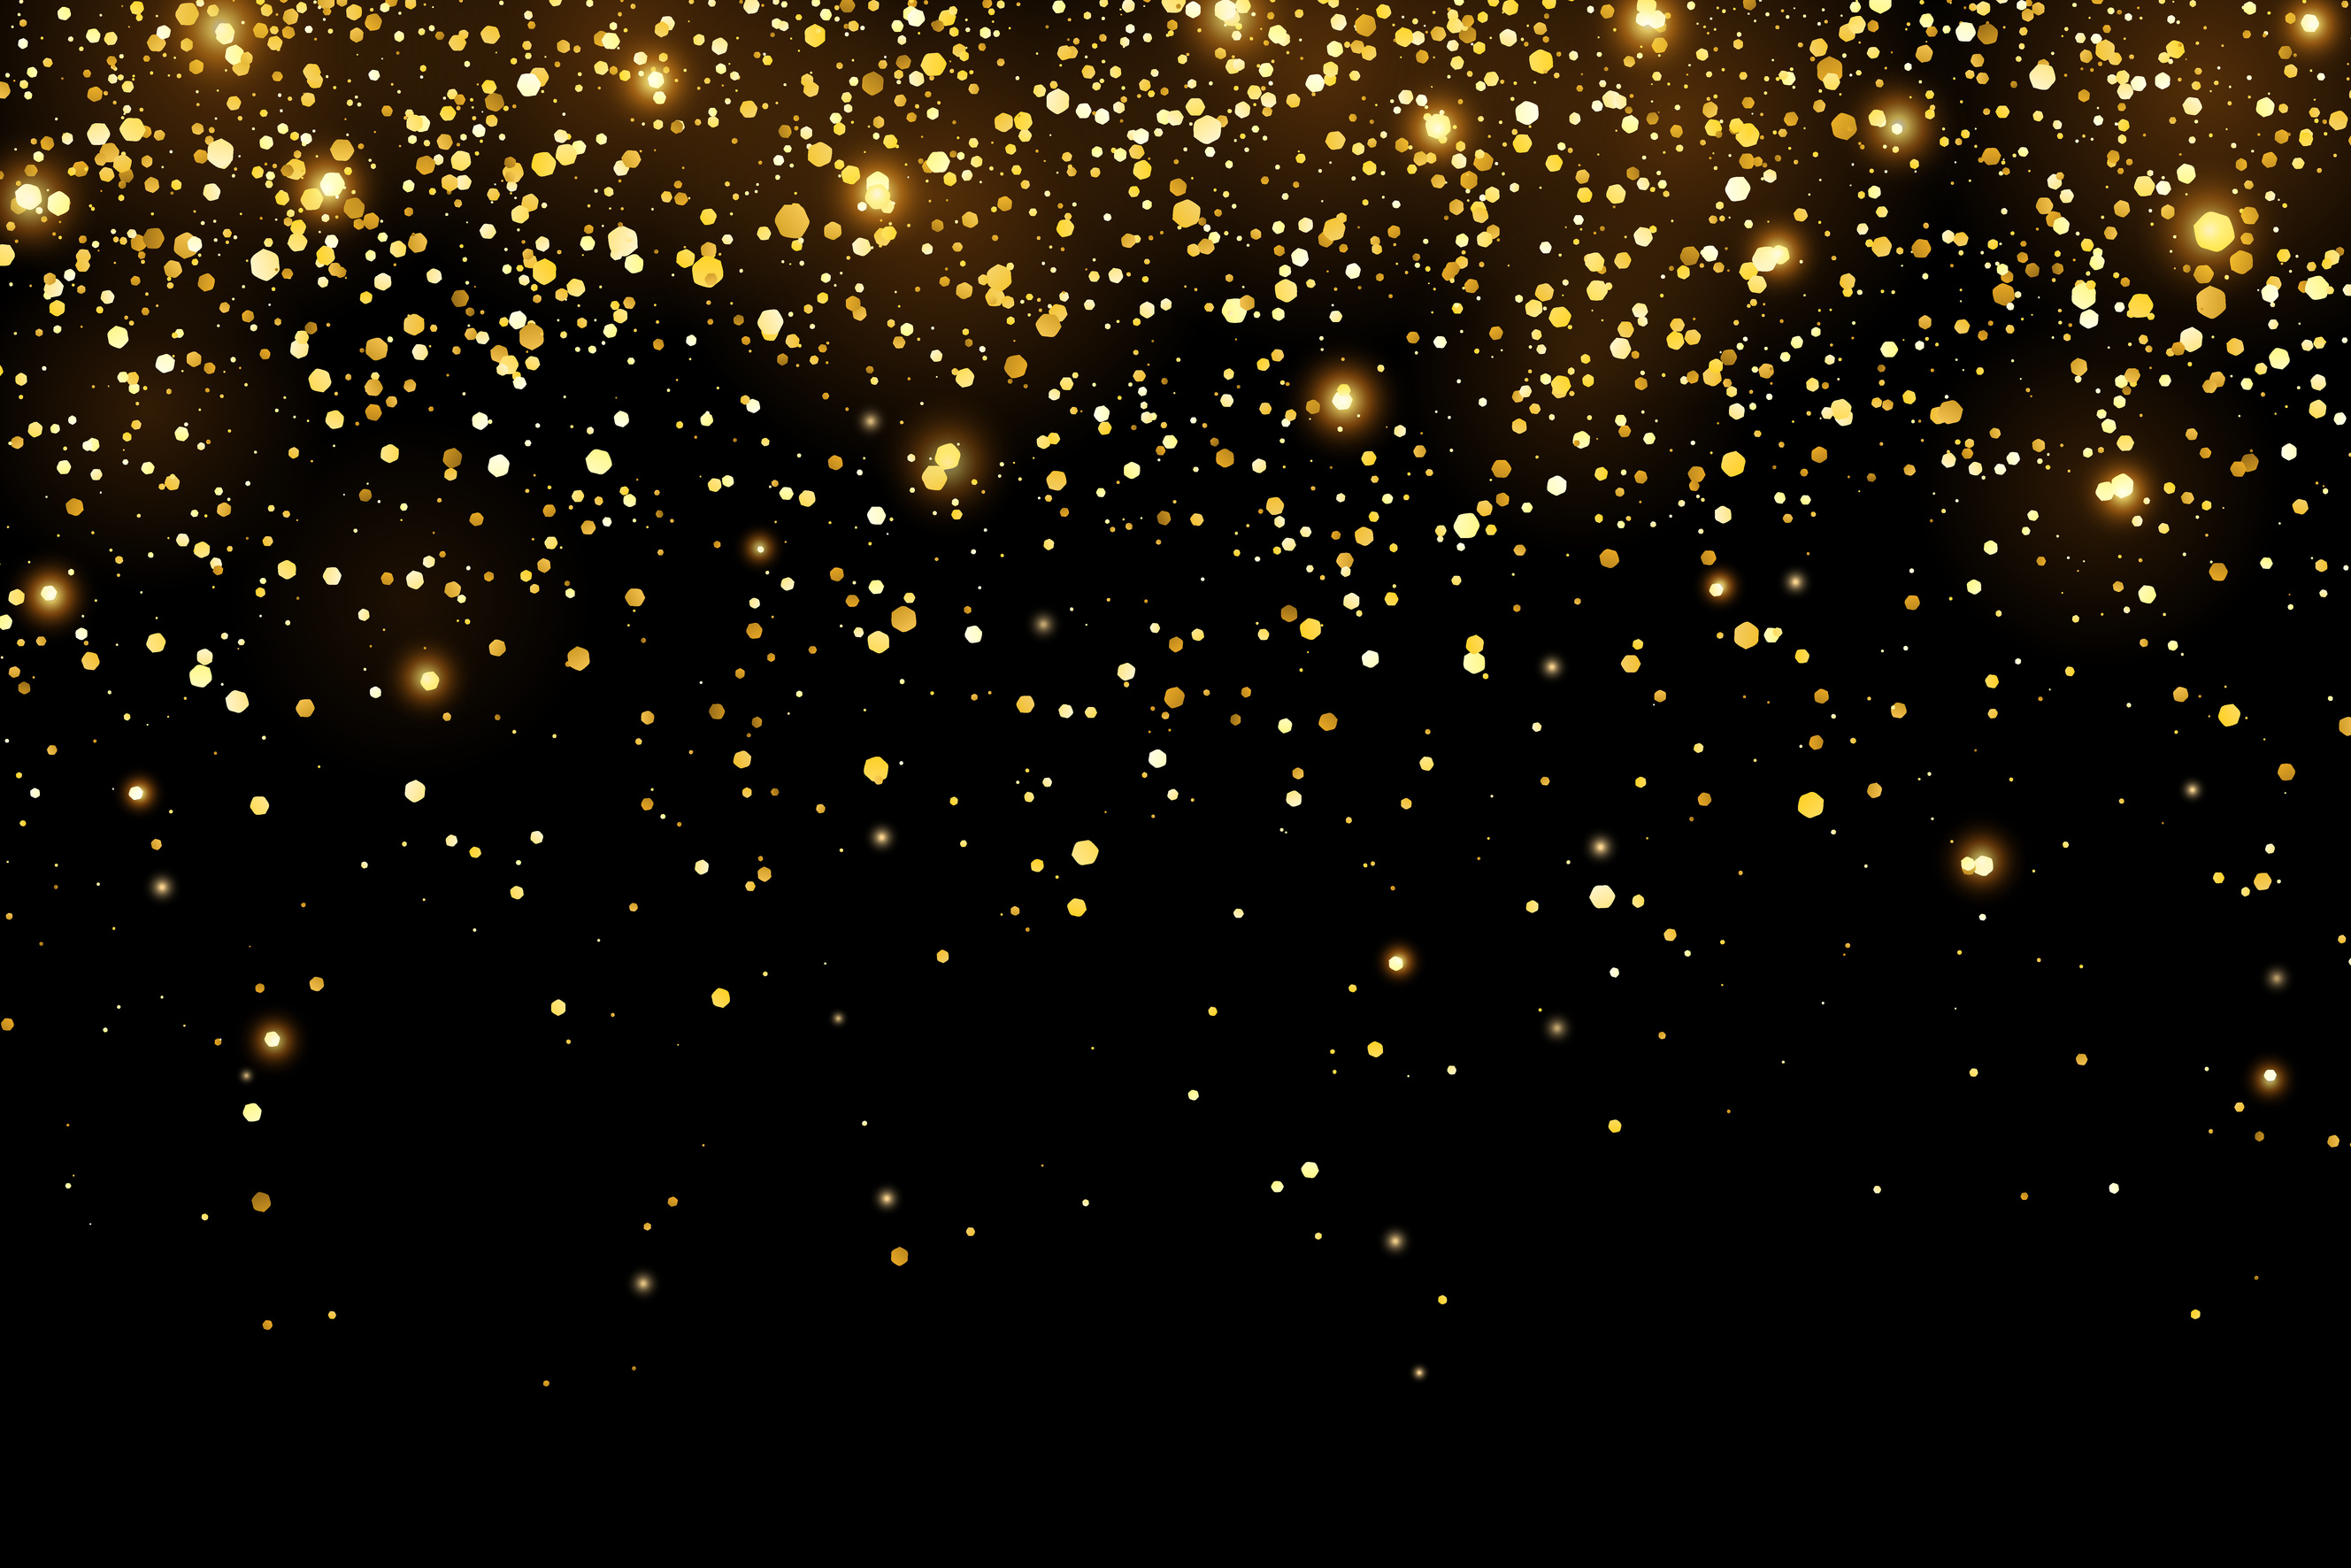 Gold Glitter Particles on Black Background